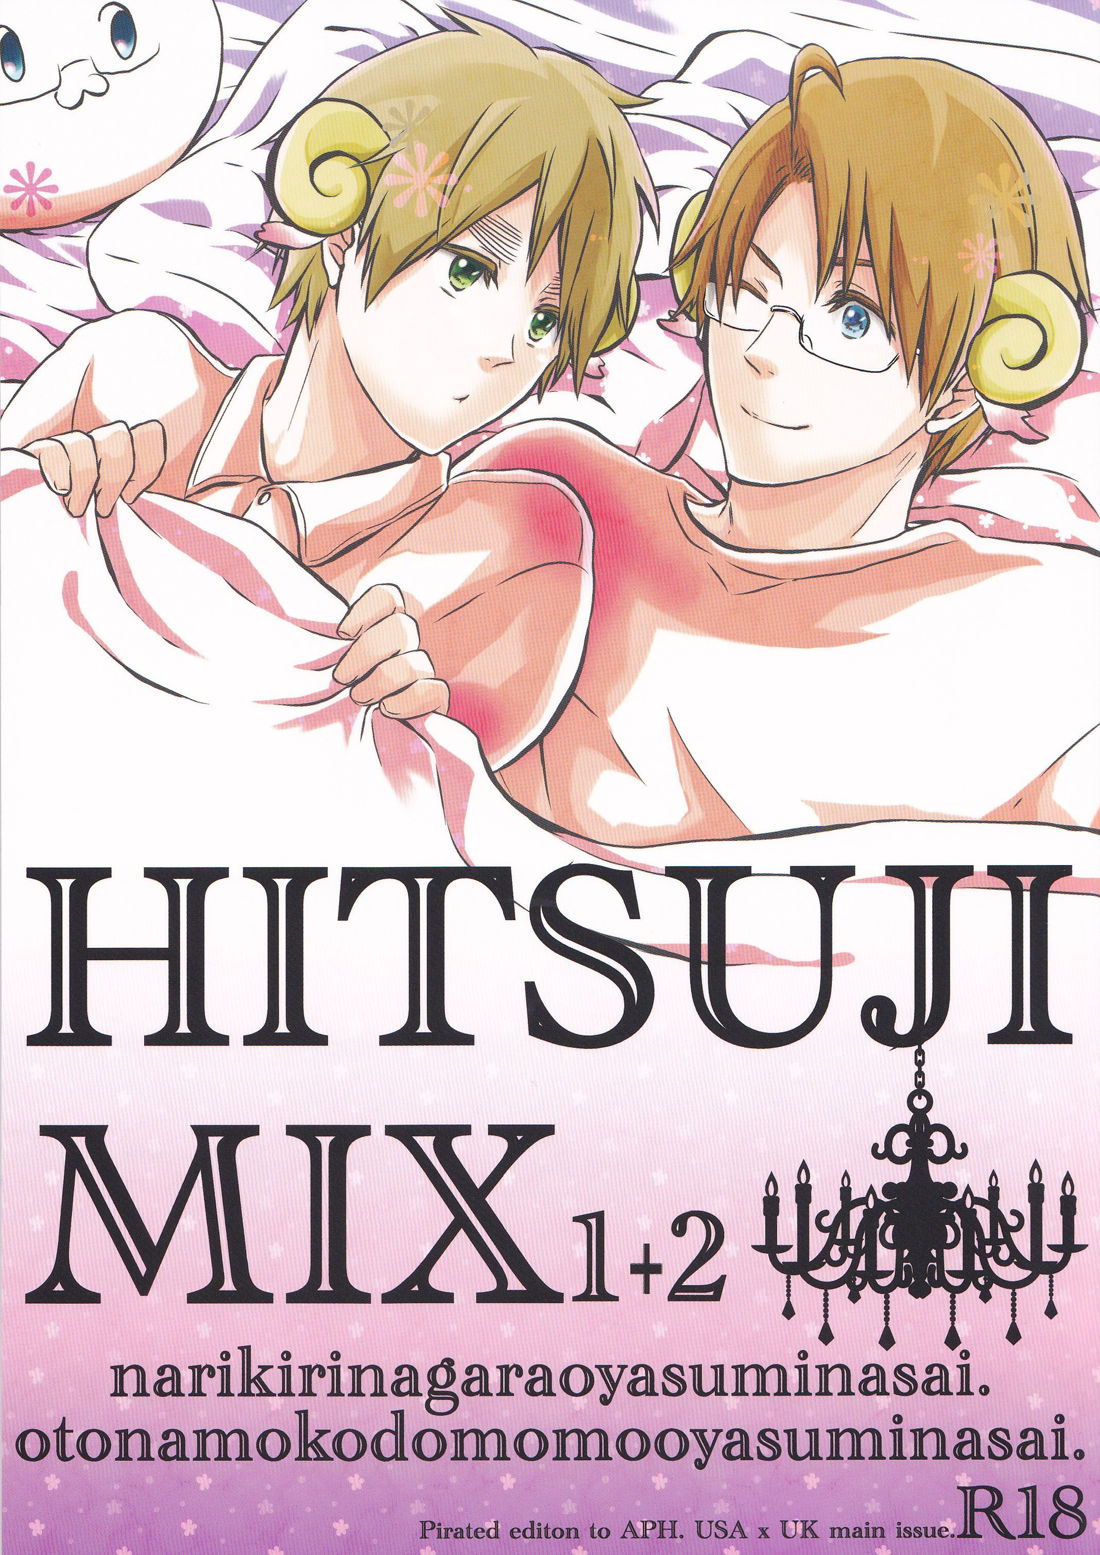 (C79) [SEVENQUEEN (Aimi)] HITSUJI MIX 1+2 (Axis Powers Hetalia) (C79) [SEVENQUEEN (愛見)] HITSUJI MIX 1+2 (Axis powers ヘタリア)